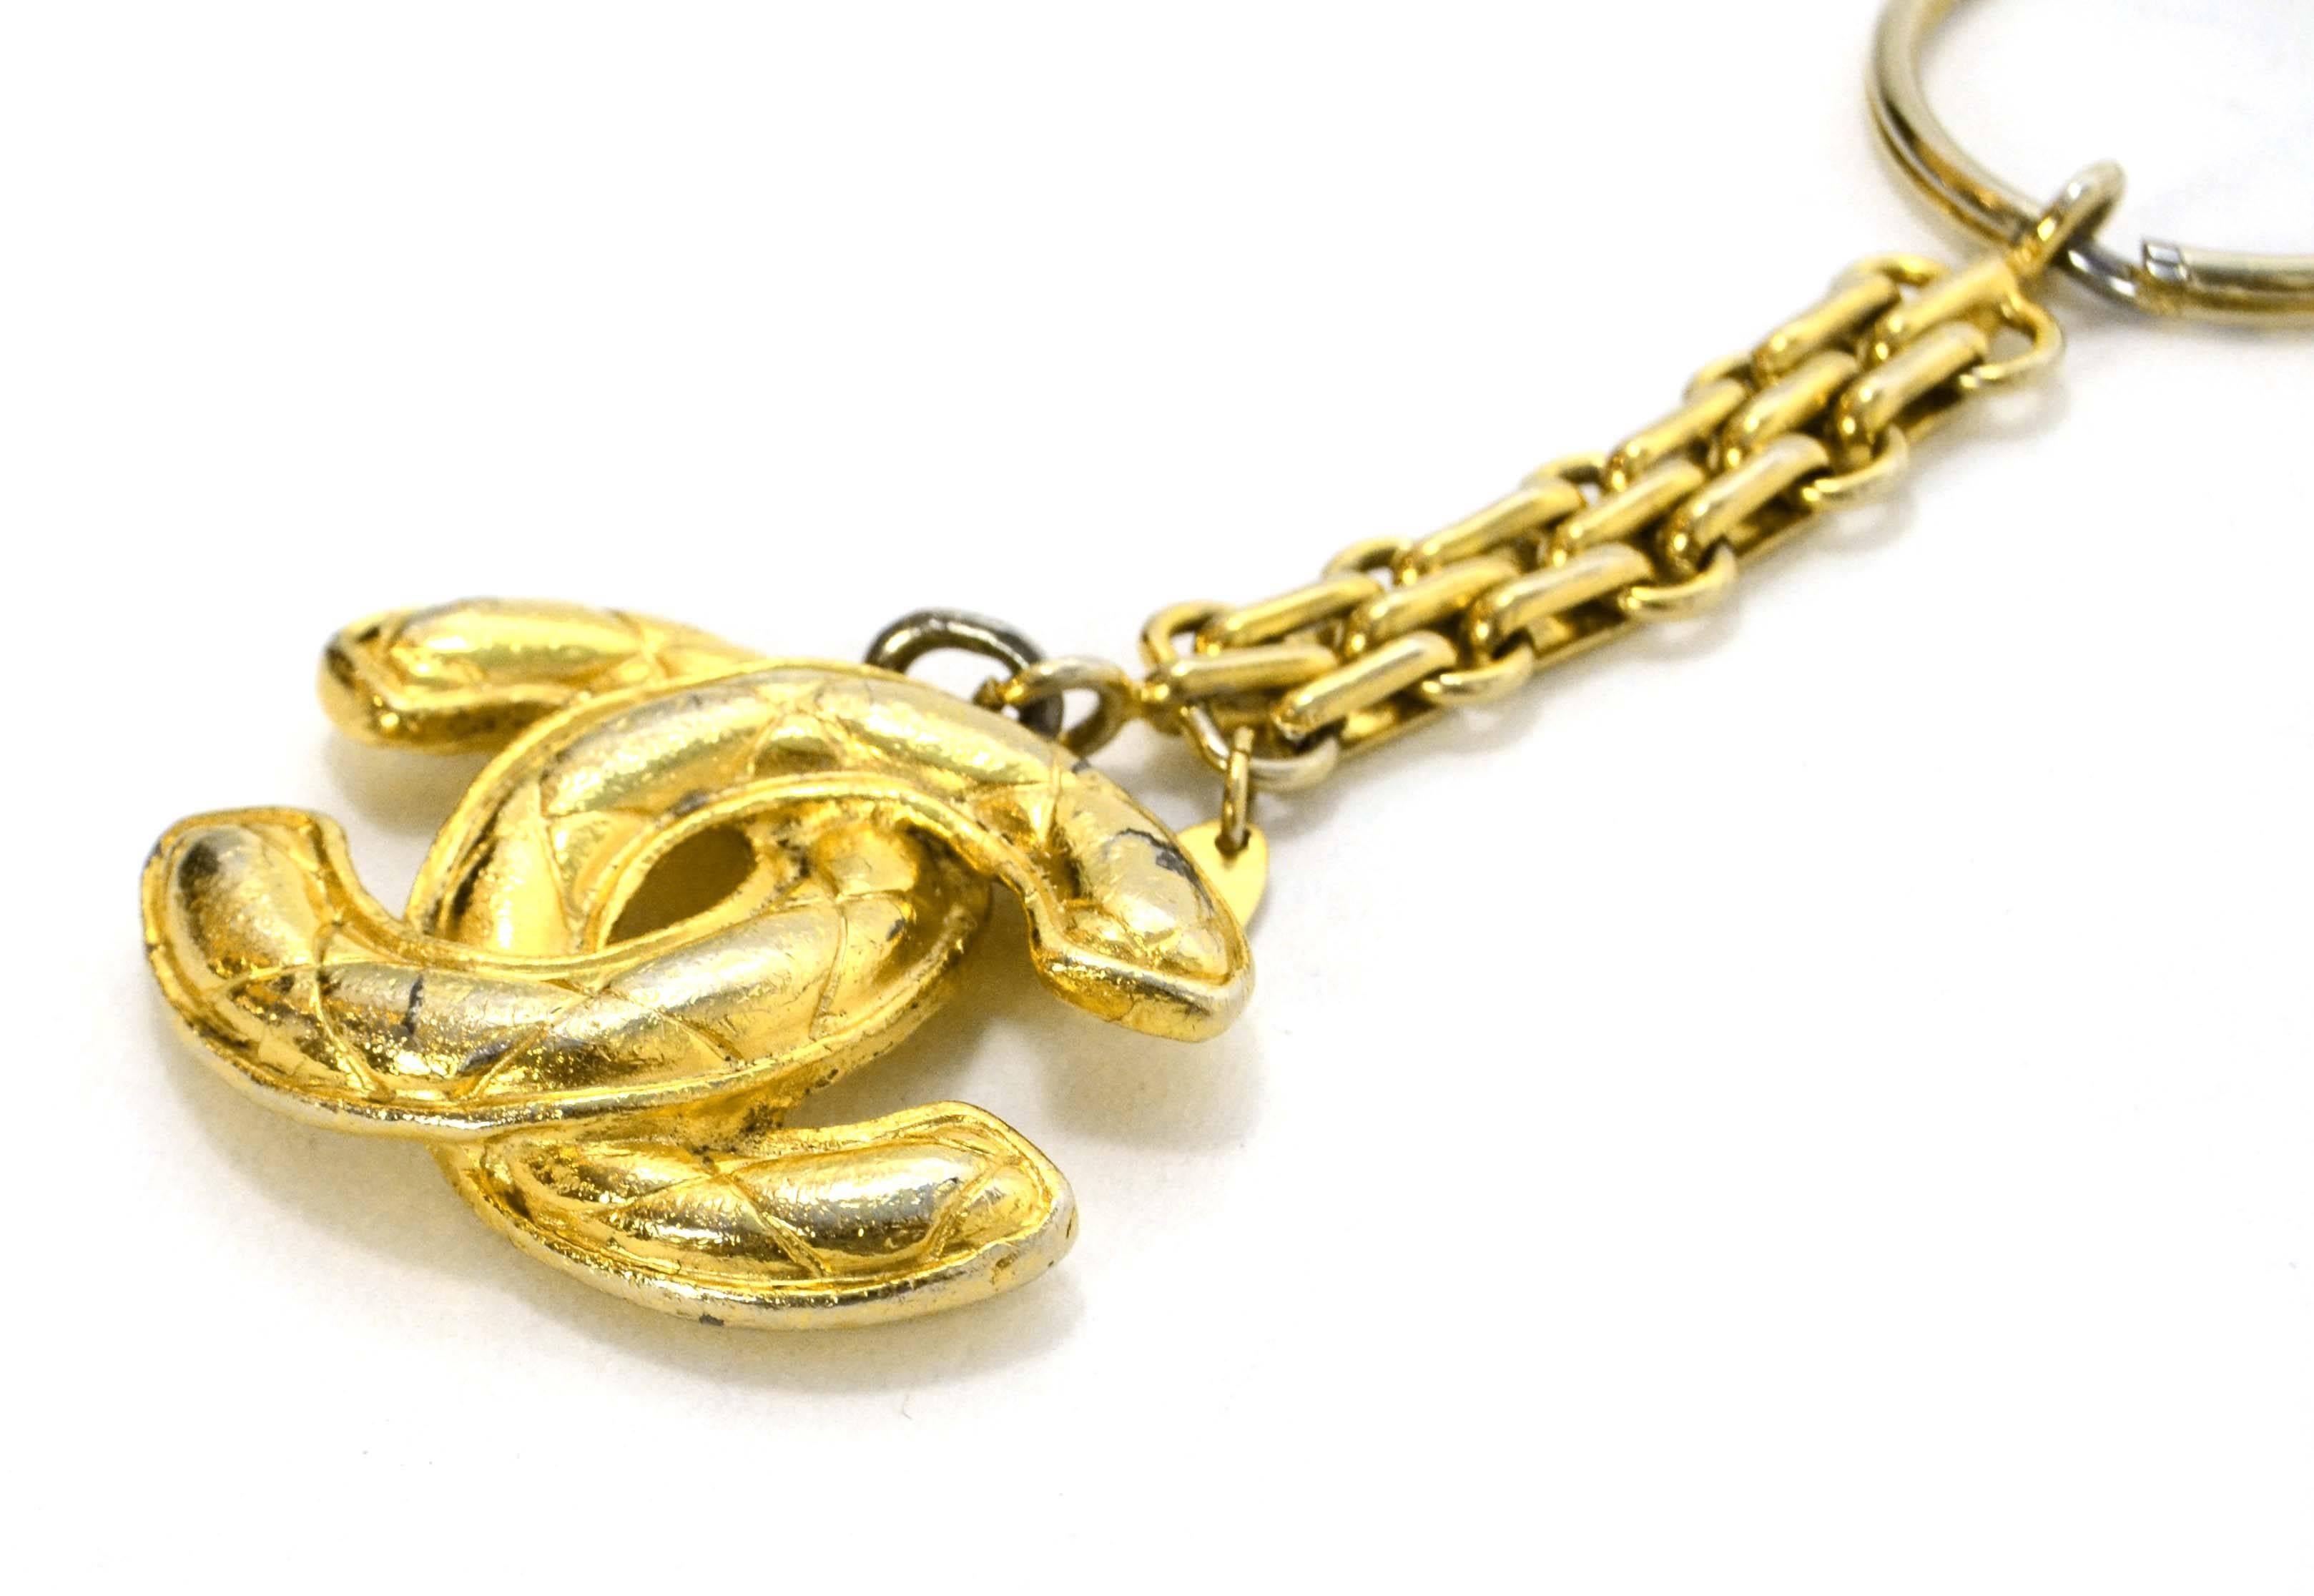 Chanel Vintage '90s Gold Quilted CC Keyring
Made In: France
Year of Production: 1990-1992
Color: Goldtone
Materials: Metal
Closure: None
Stamp: Chanel CC Made in France
Overall Condition: Good vintage, pre-owned condition with the exception